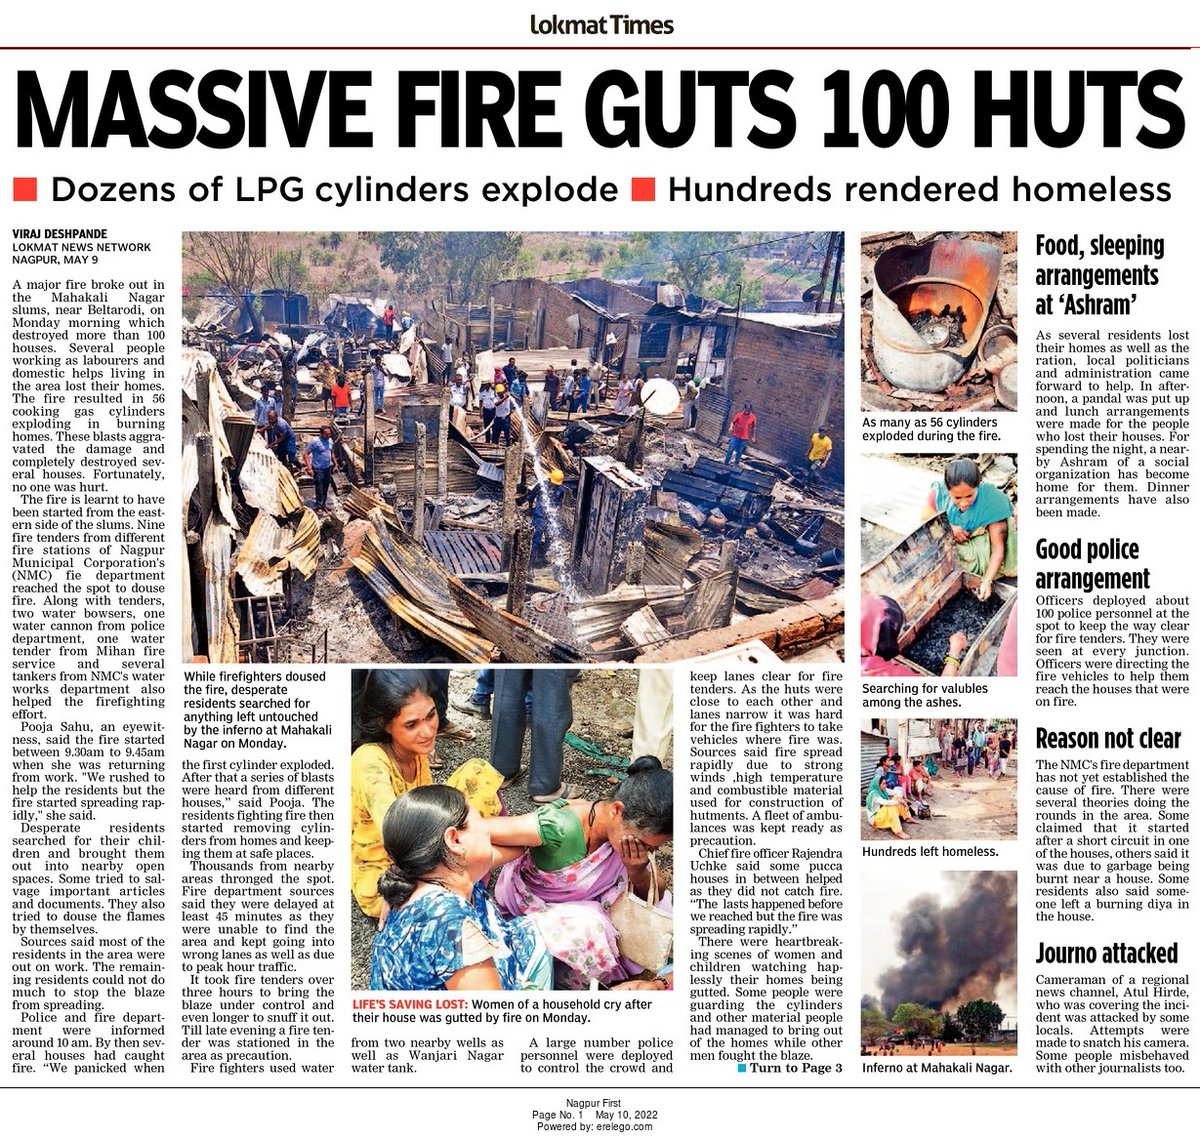 Hundreds of people were left homeless after a #MassiveFire gutted over 100 huts in Mahakali Nagar slums on Monday. It was a heartbreaking moment for everyone as people lost their lifetime earnings. They are hoping for help from govt.
 #LokmatTimes
@nitin_gadkari @NitinRaut_INC